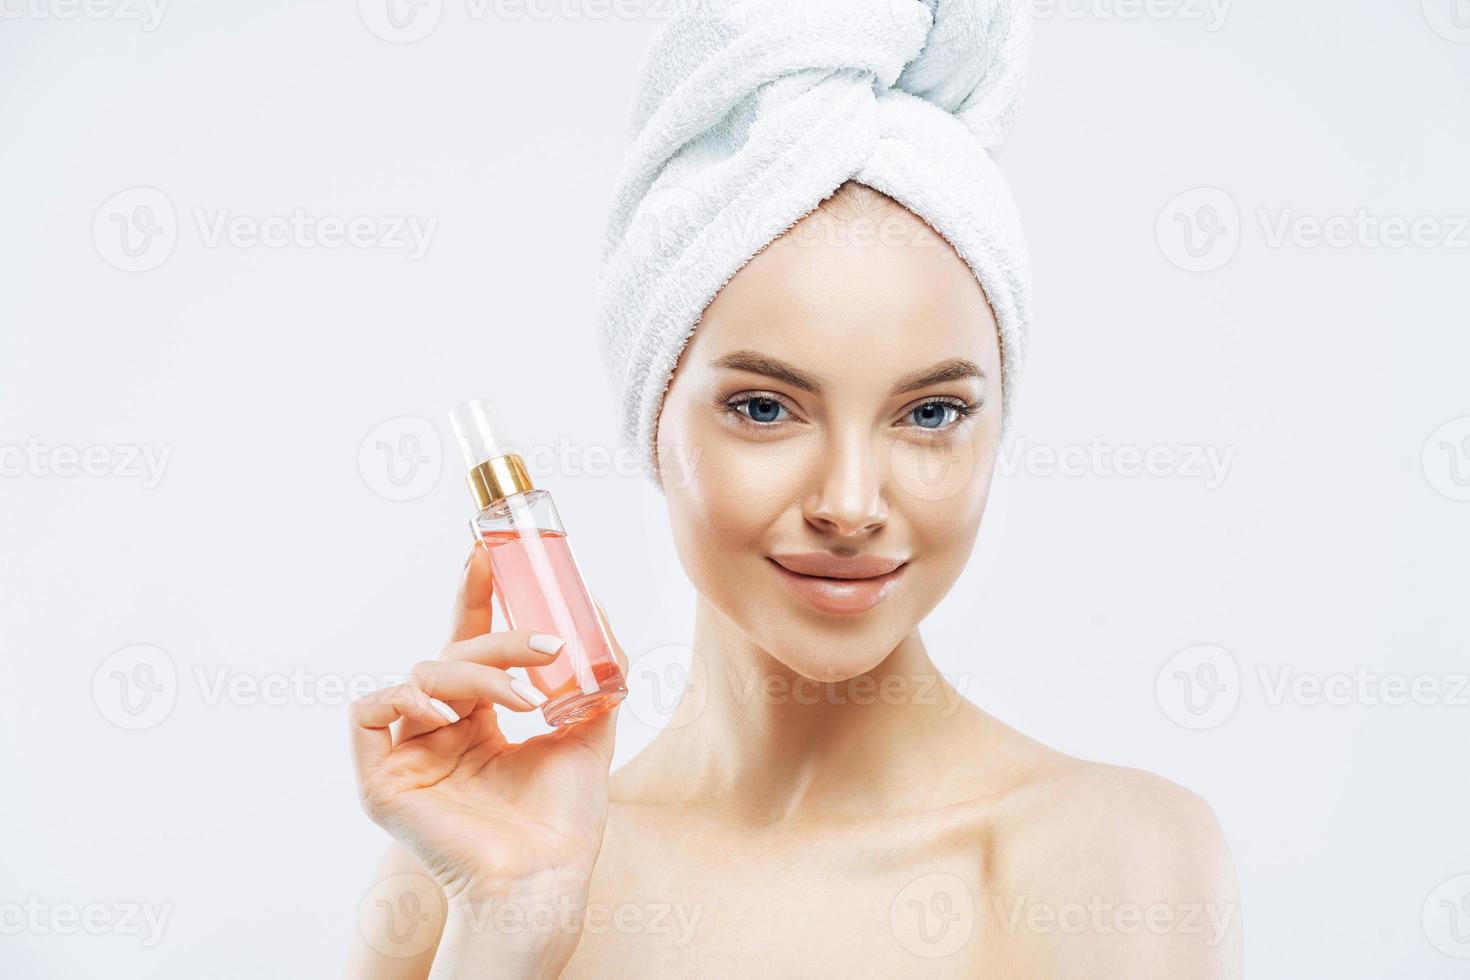 Young pleasant looking woman uses perfum, likes new smell, stands delighted indoor, applies makeup, has healthy skin wears bath towel isolated on white background has glamorous look. Pleasant smelling photo